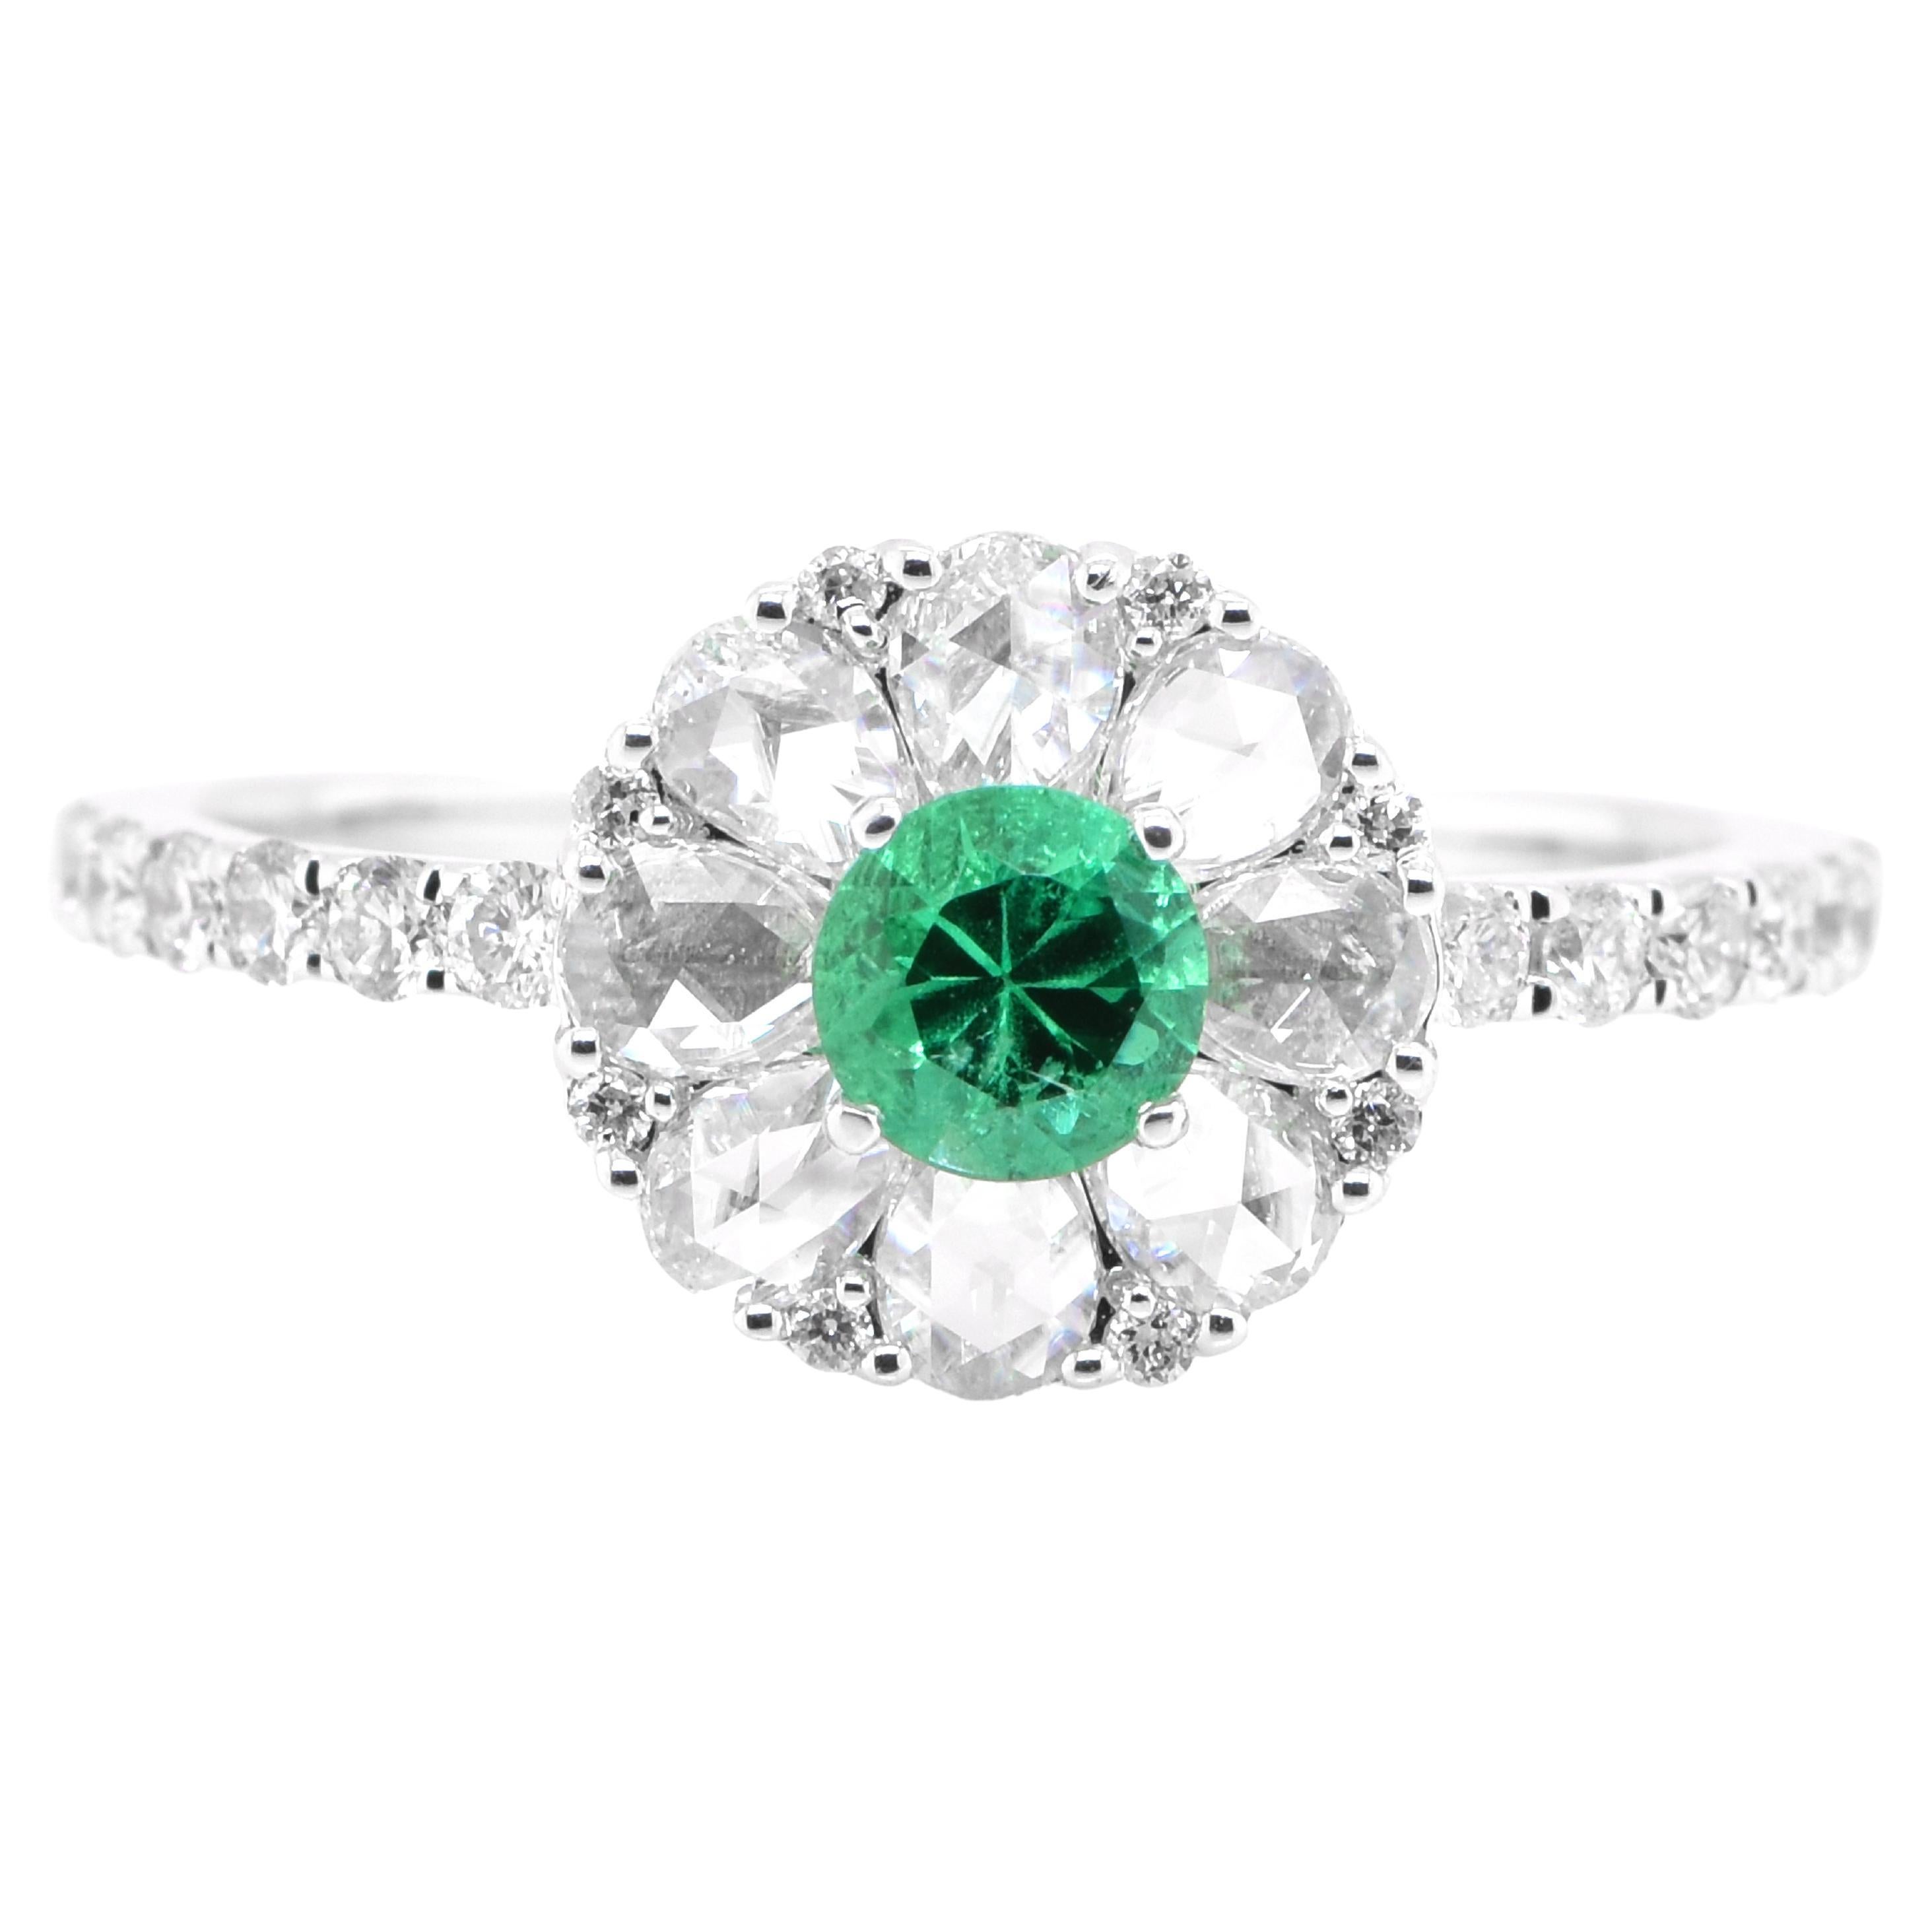  0.26 Carat Natural Emerald and Rose-Cut Diamond Ring set in 18K White Gold